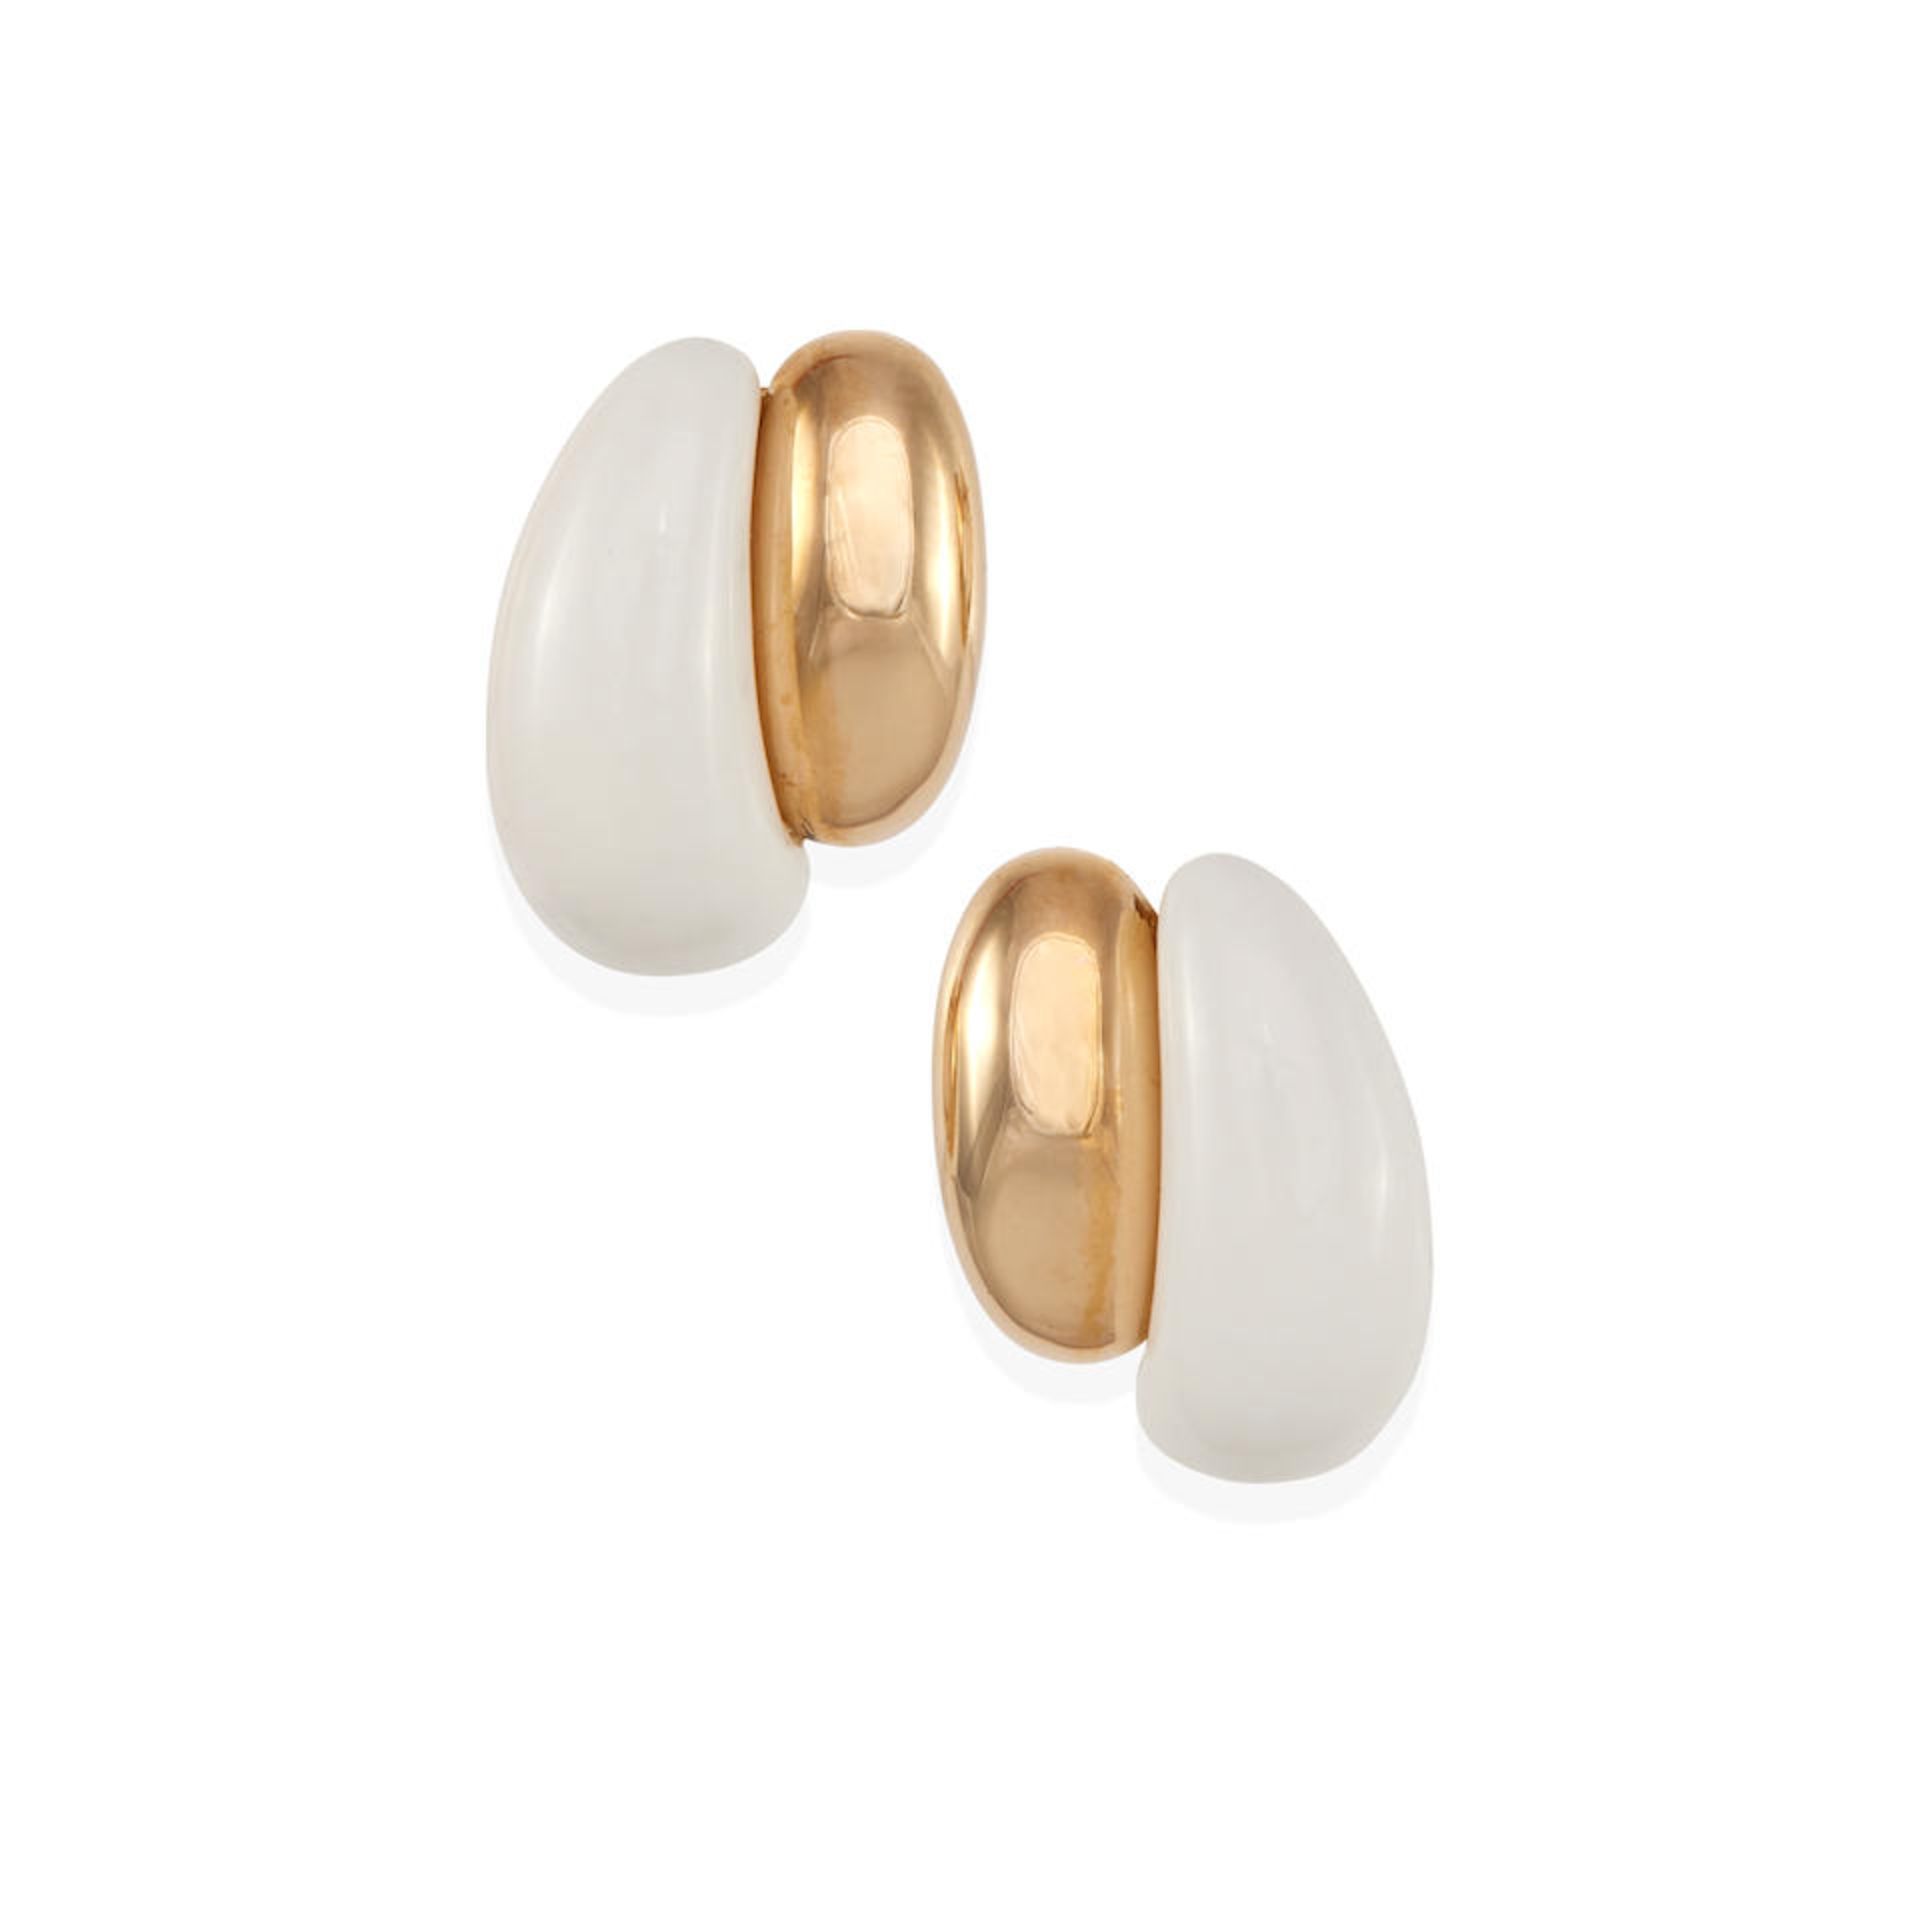 A PAIR OF 14K GOLD AND WHITE AGATE EARRINGS